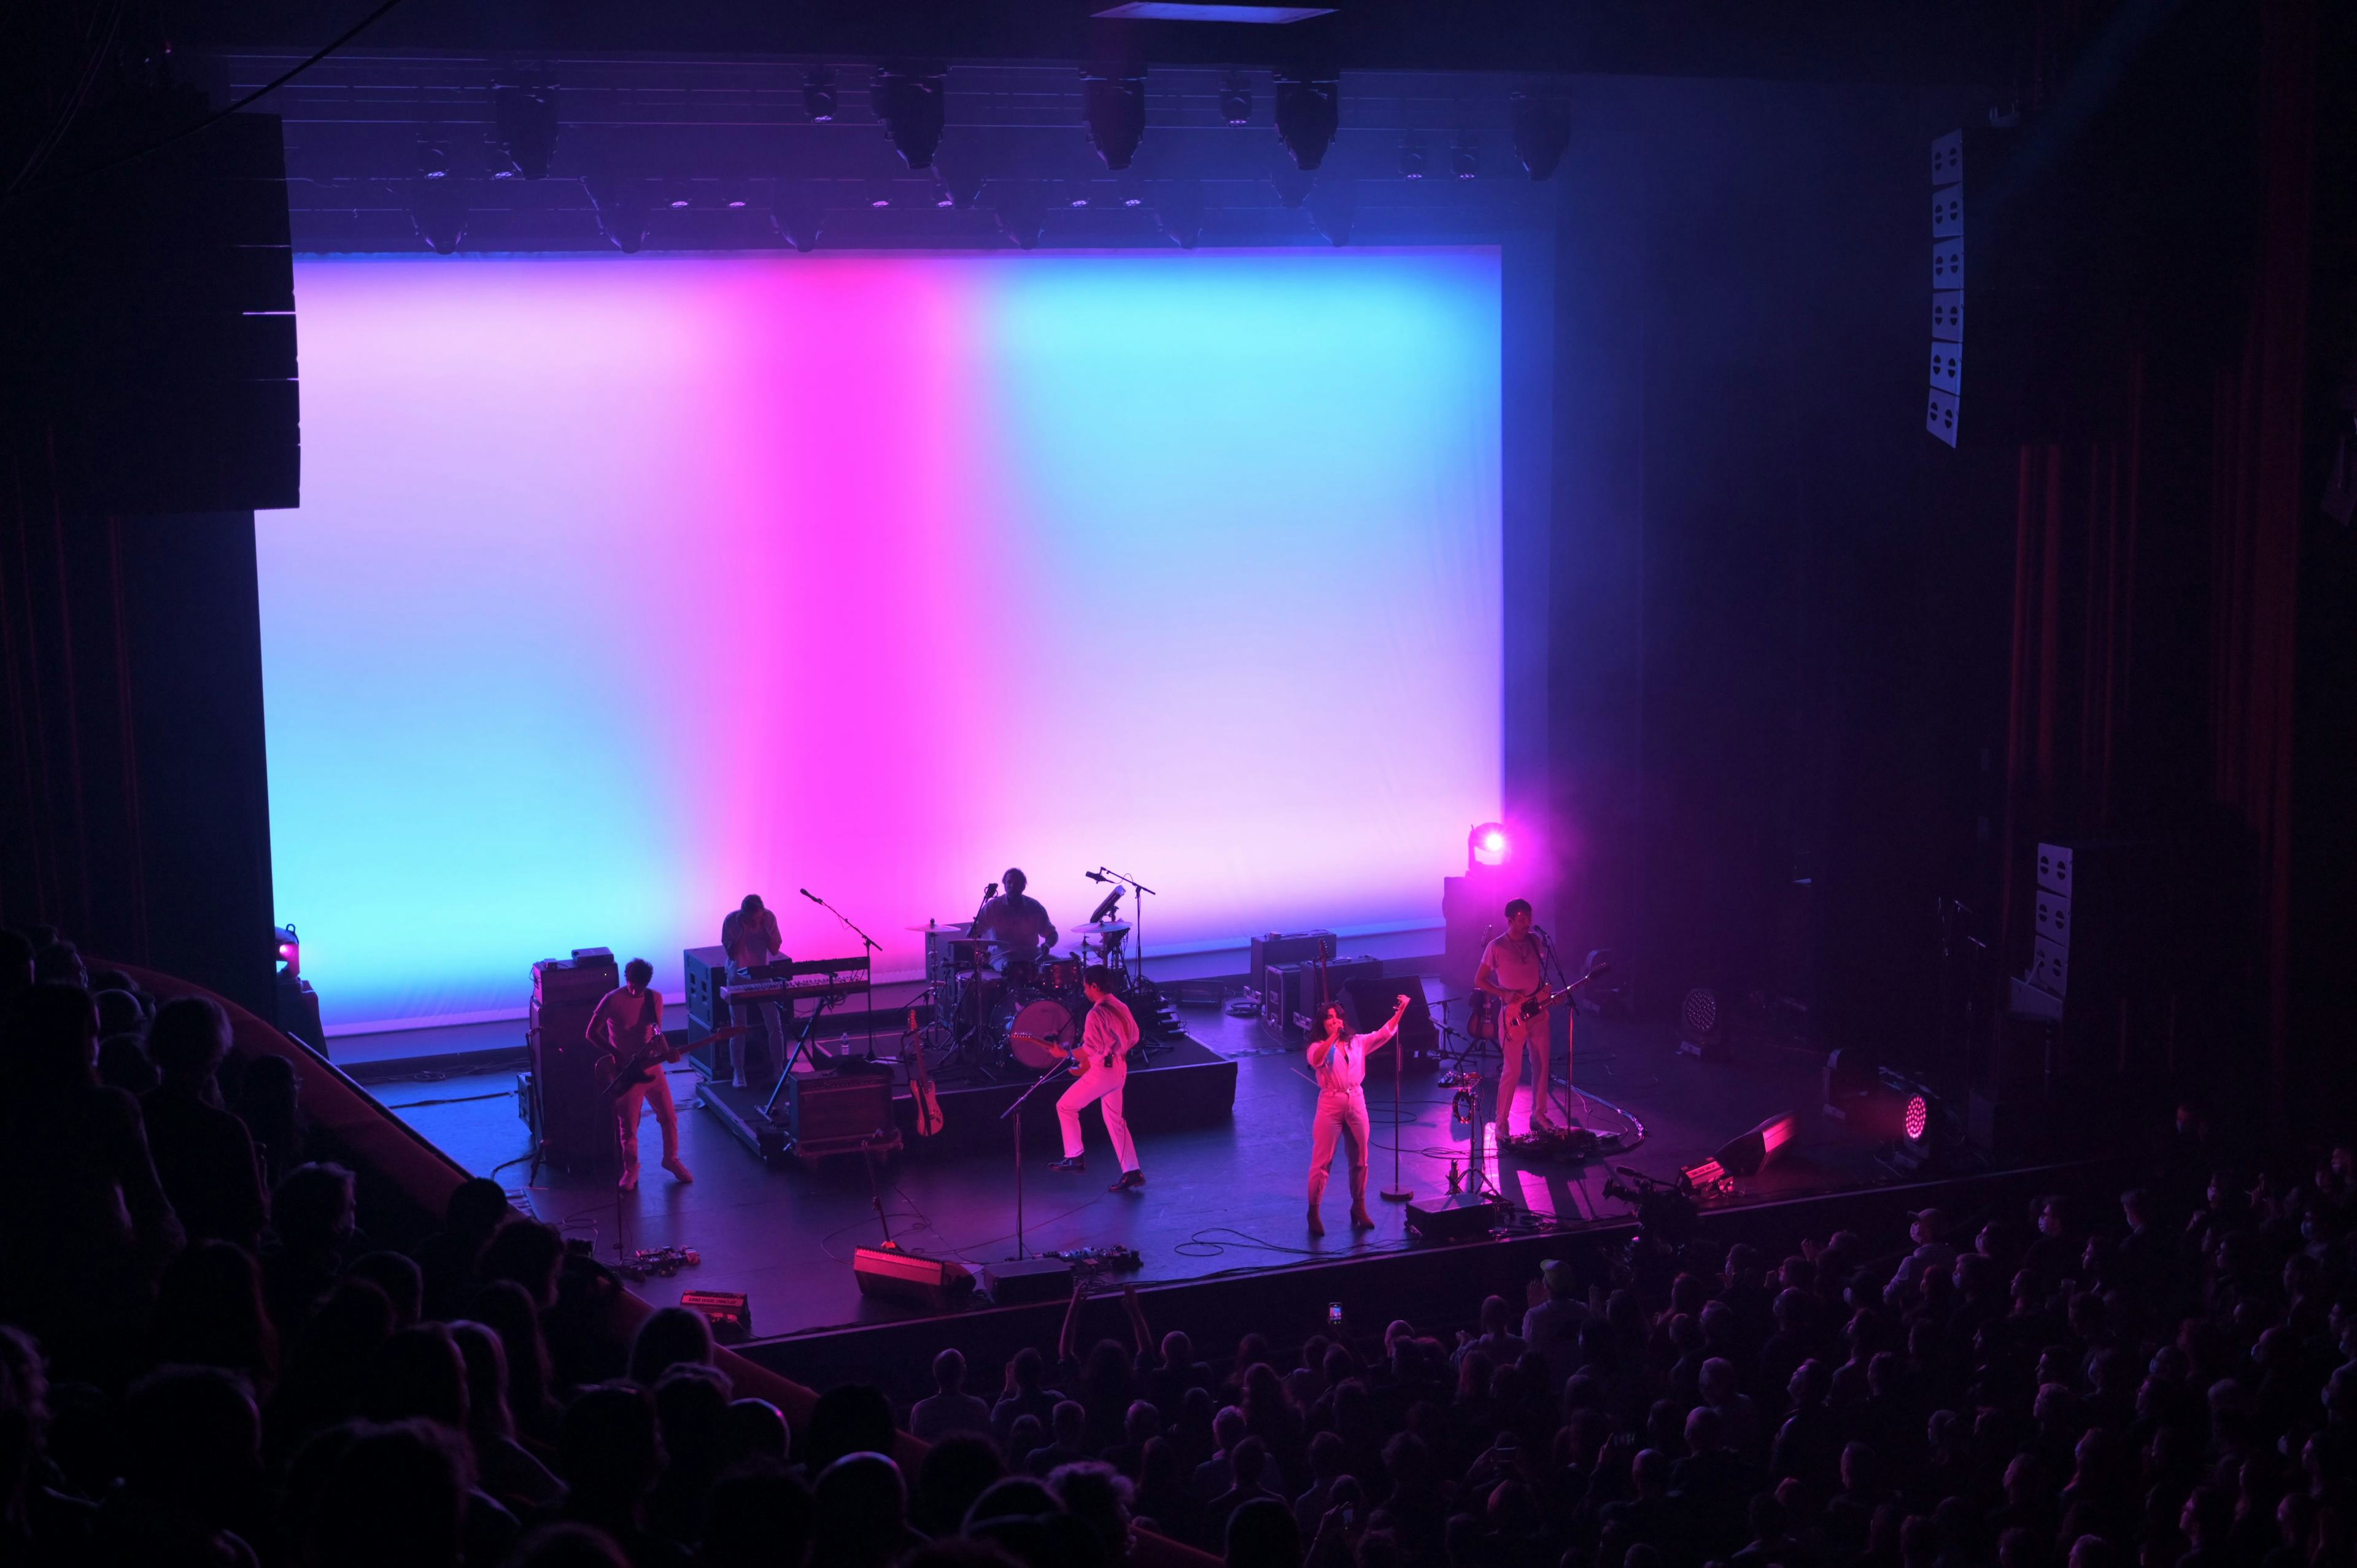  Lilly Wood & The Prick, 2021 Tour, Olympia, Scenography, Light Design, Cyclo, Dalis